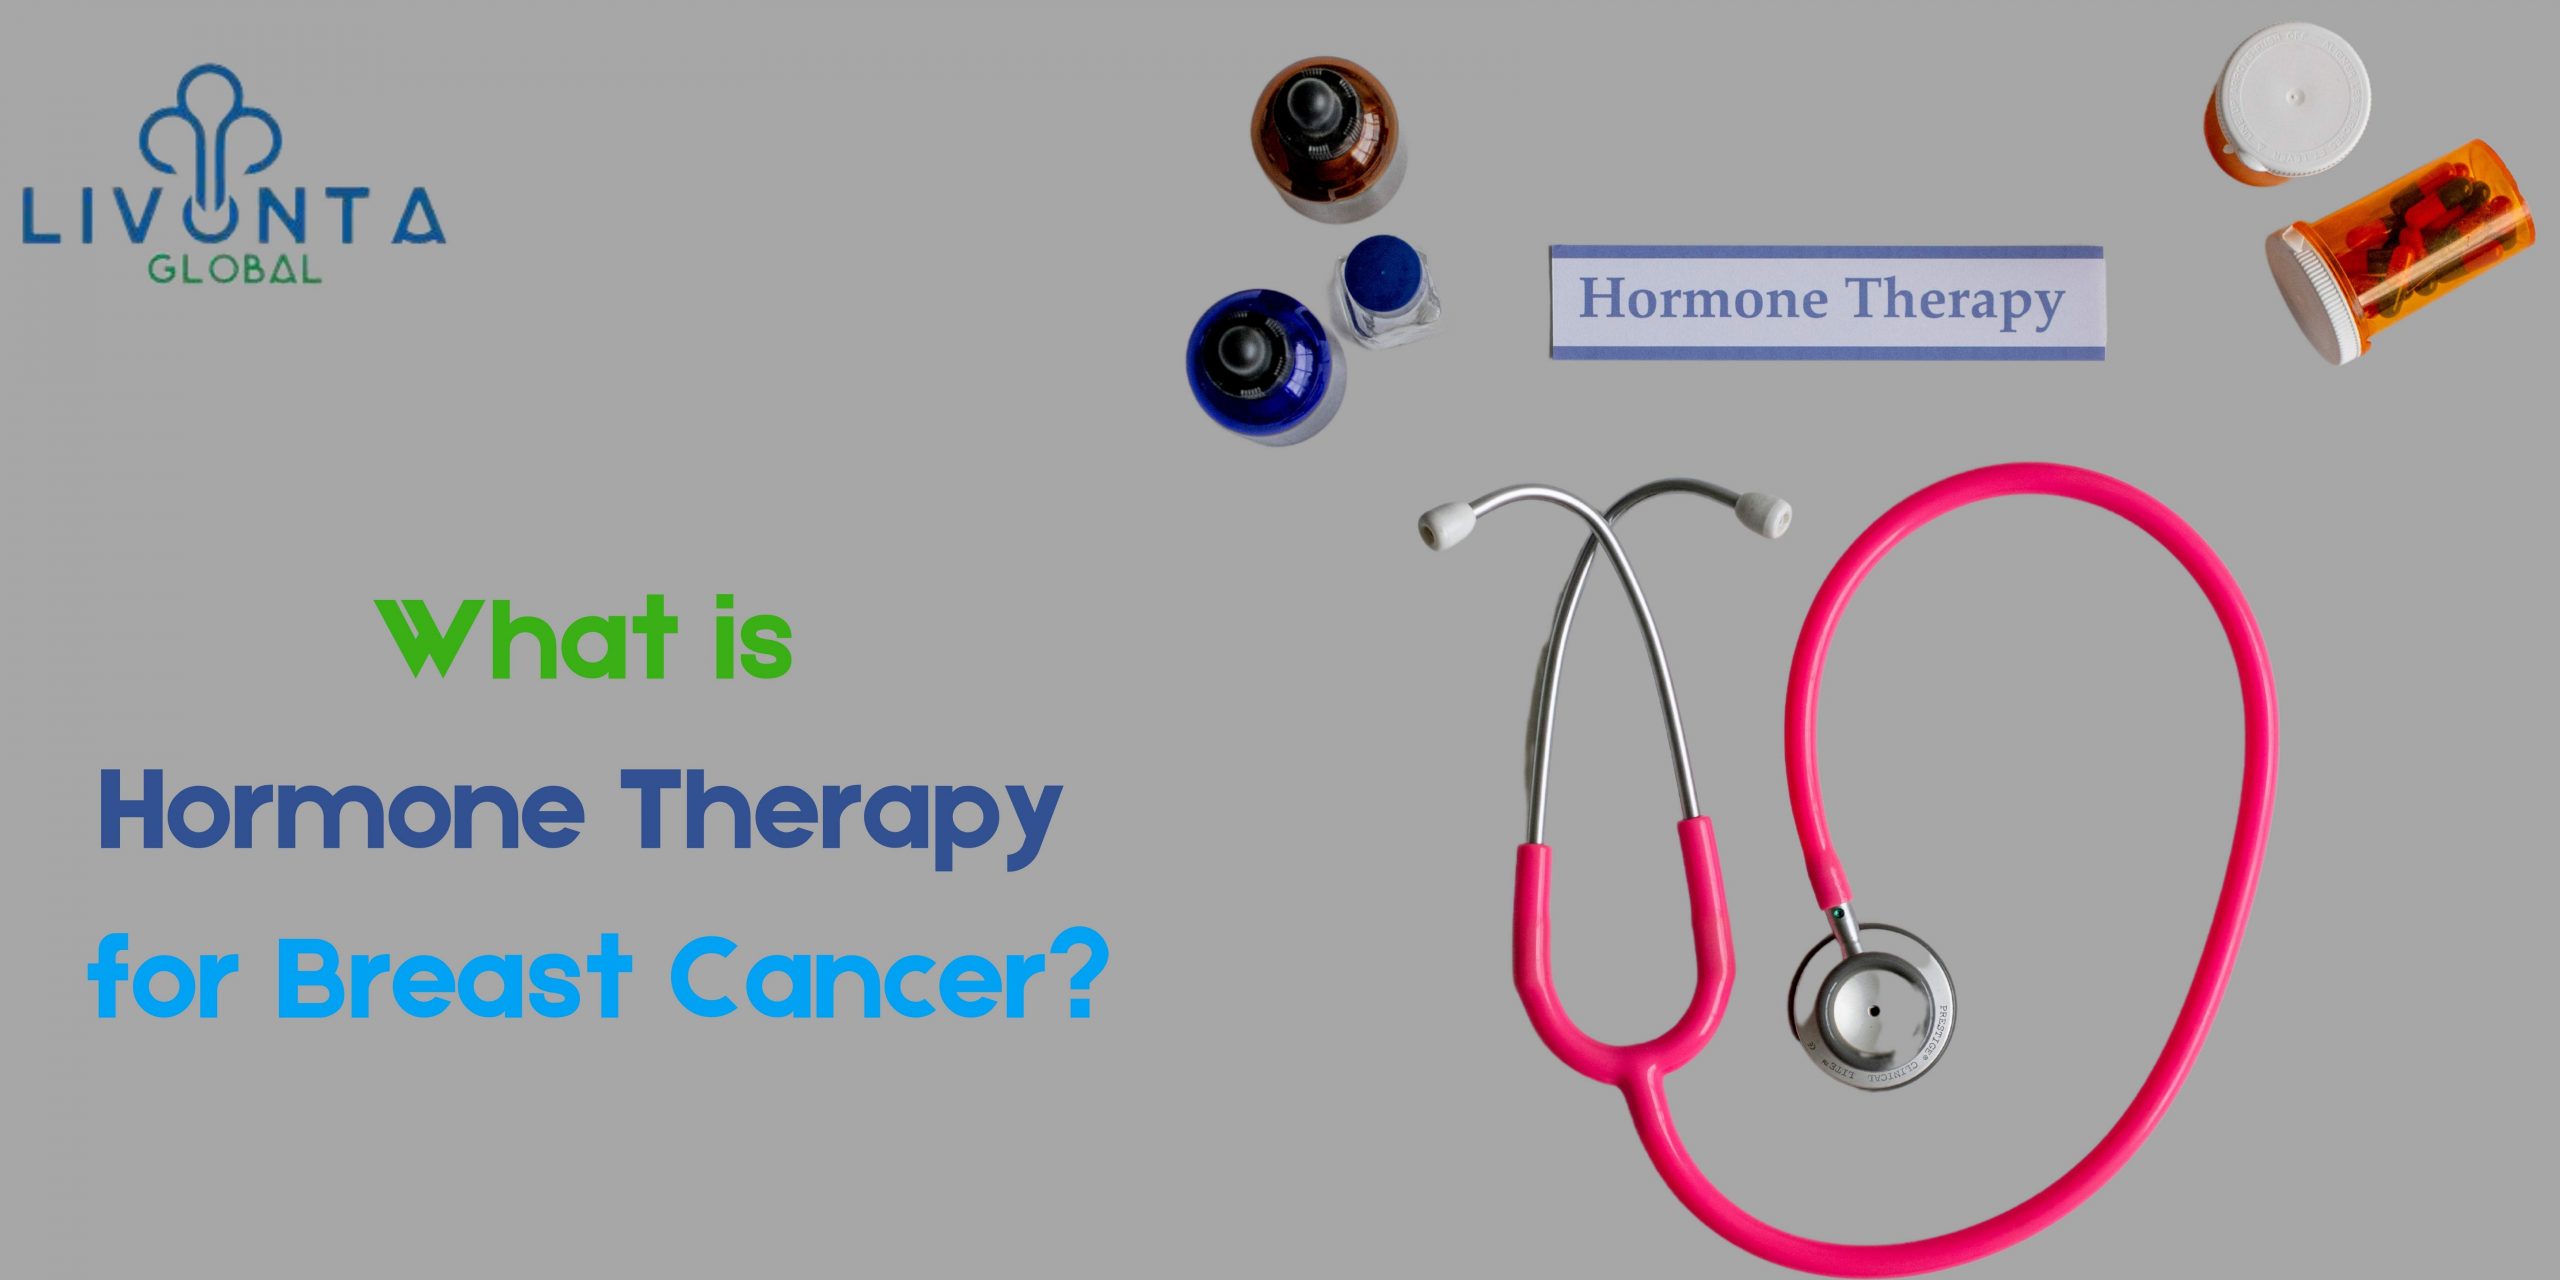 What is Hormone Therapy for Breast Cancer